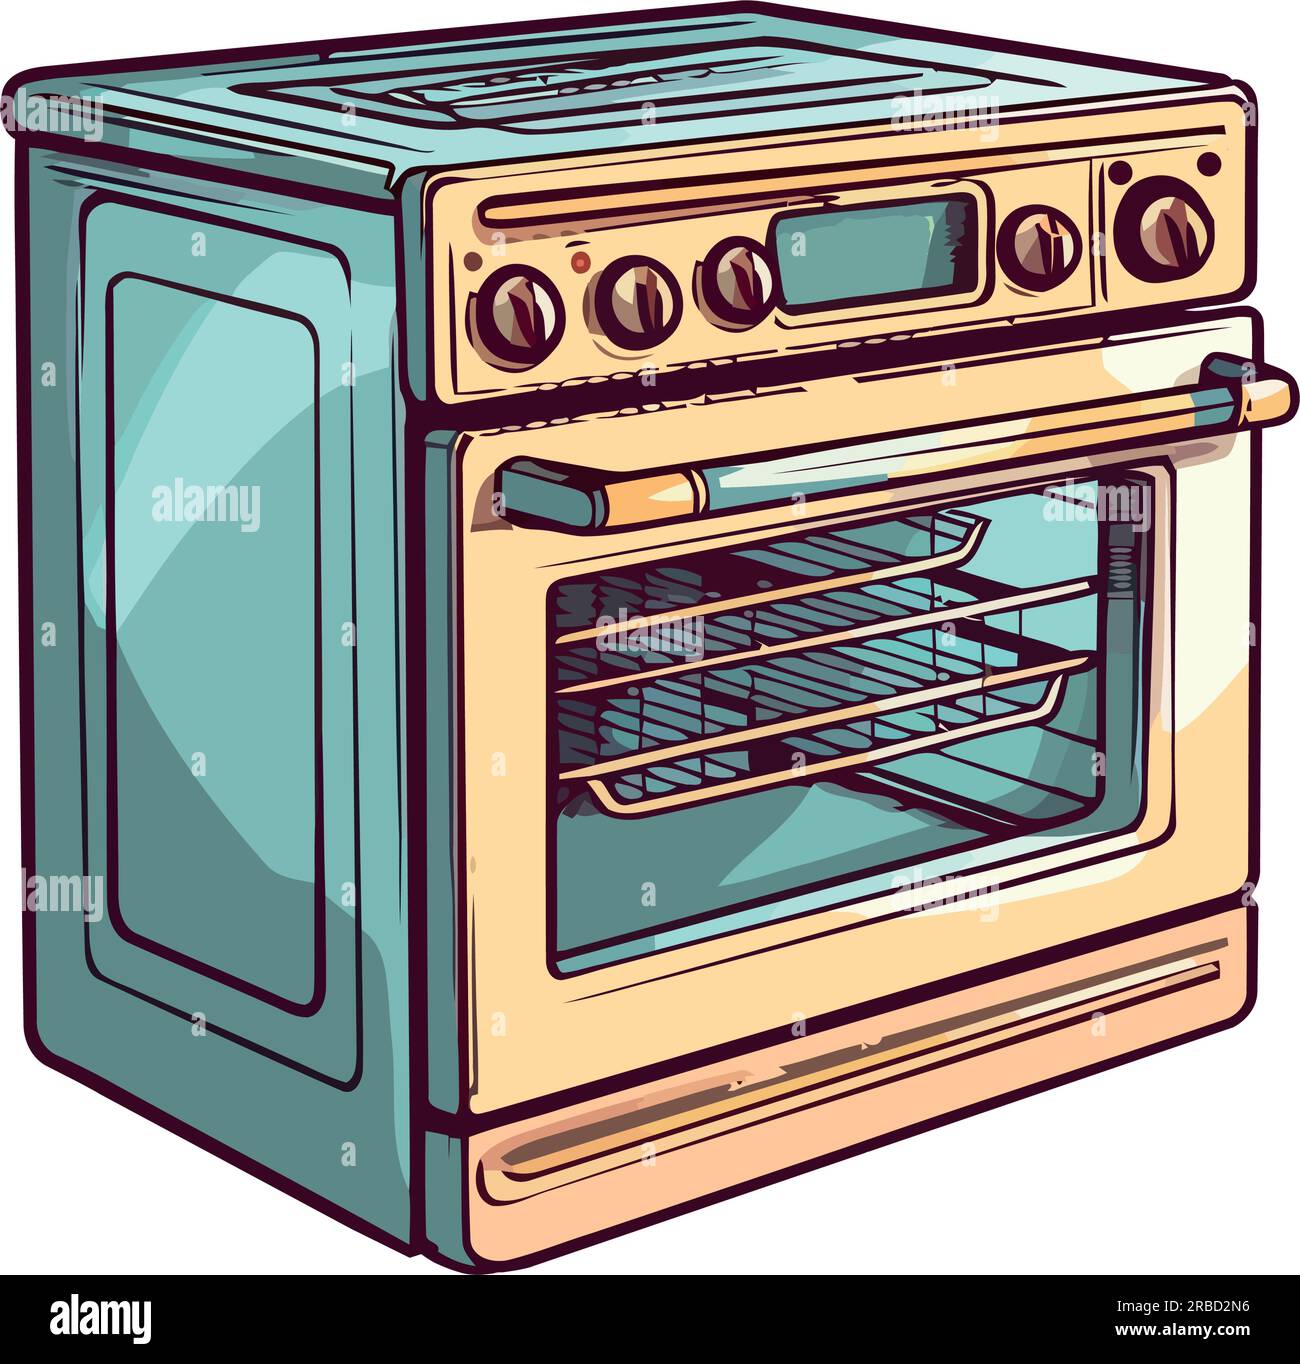 Modern Kitchen Appliance Icon Electric Oven Stove Icon Isolated Stock  Vector by ©stockgiu 652181740